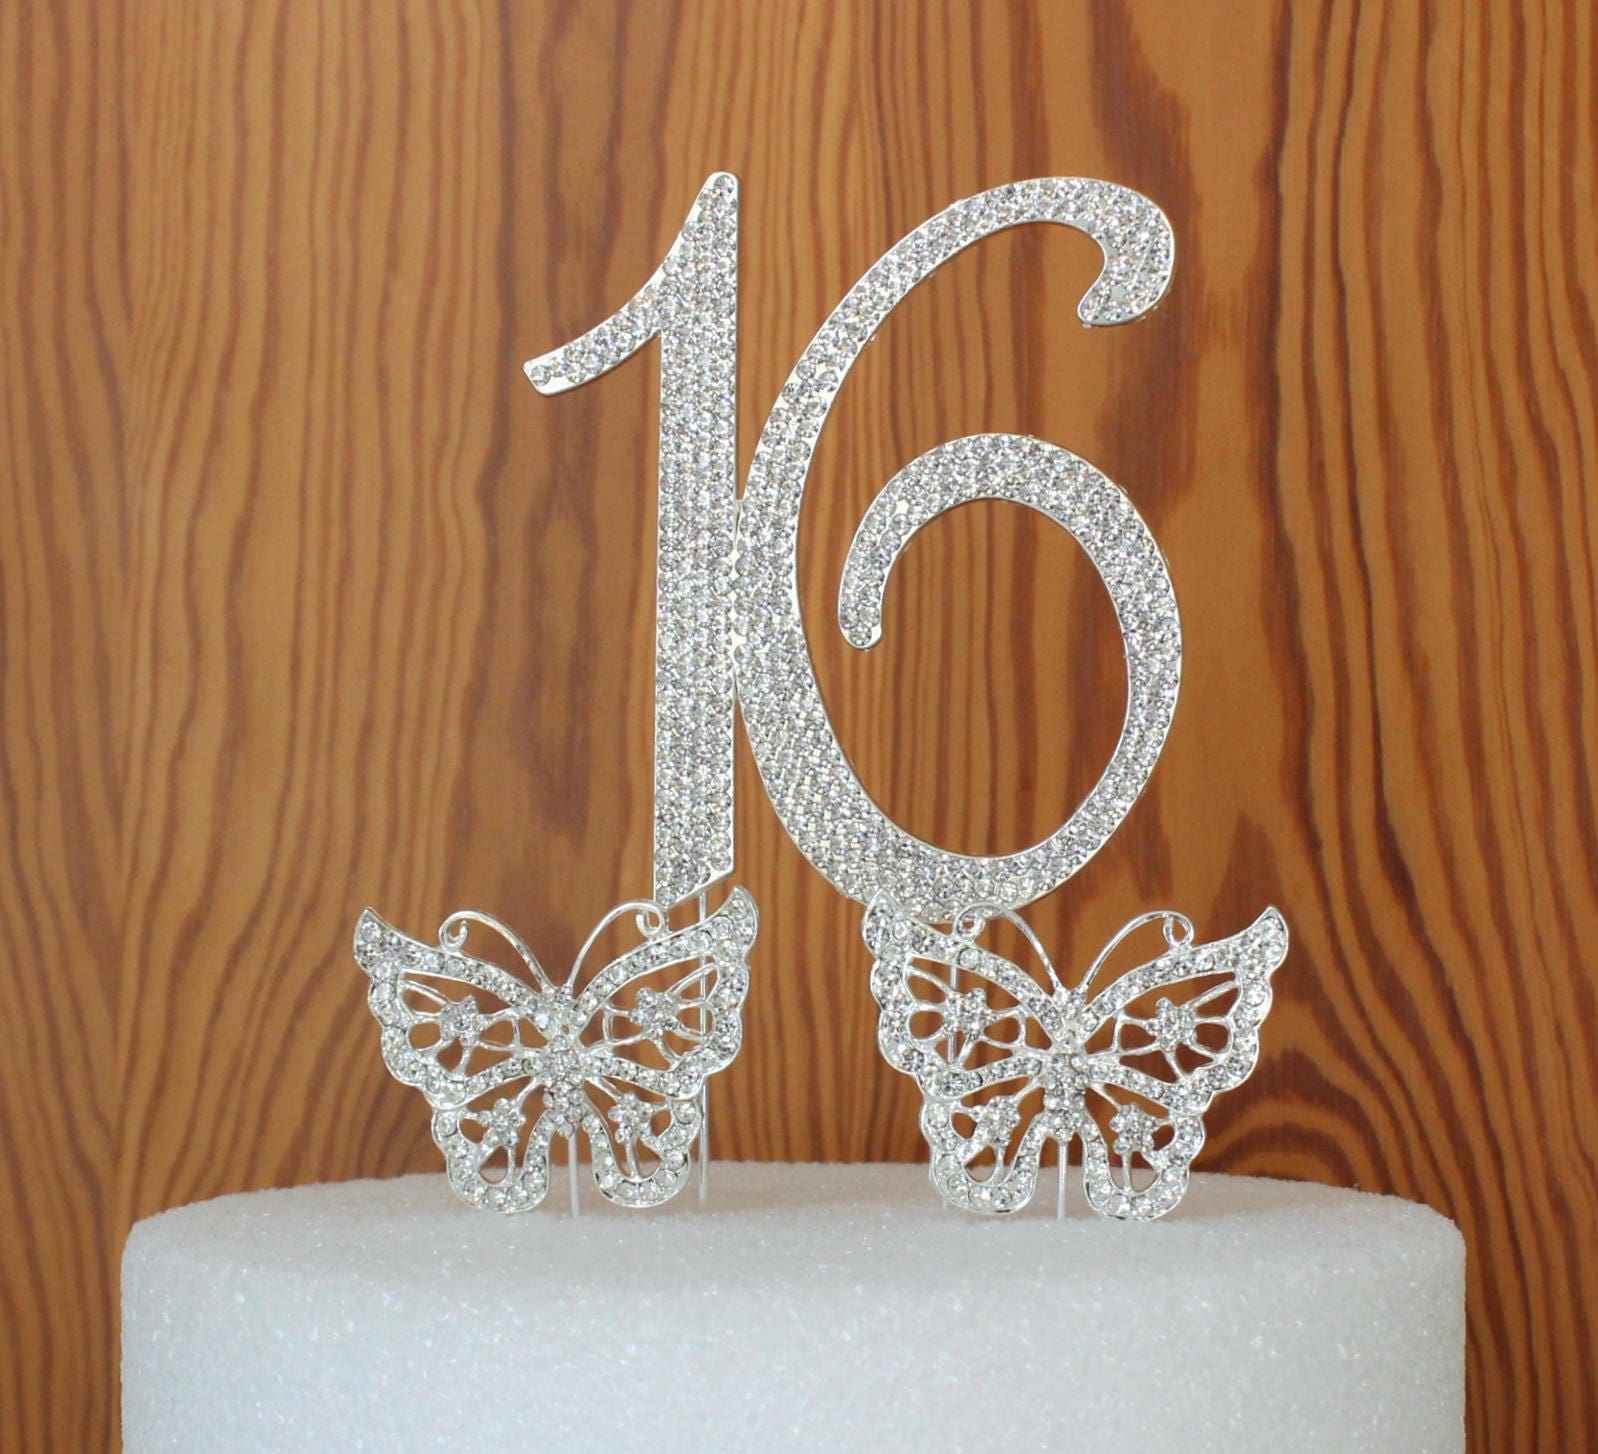 Sweet 16 Silver Crystal Rhinestone Cake Topper 16th Birthday Bling Party Favor 